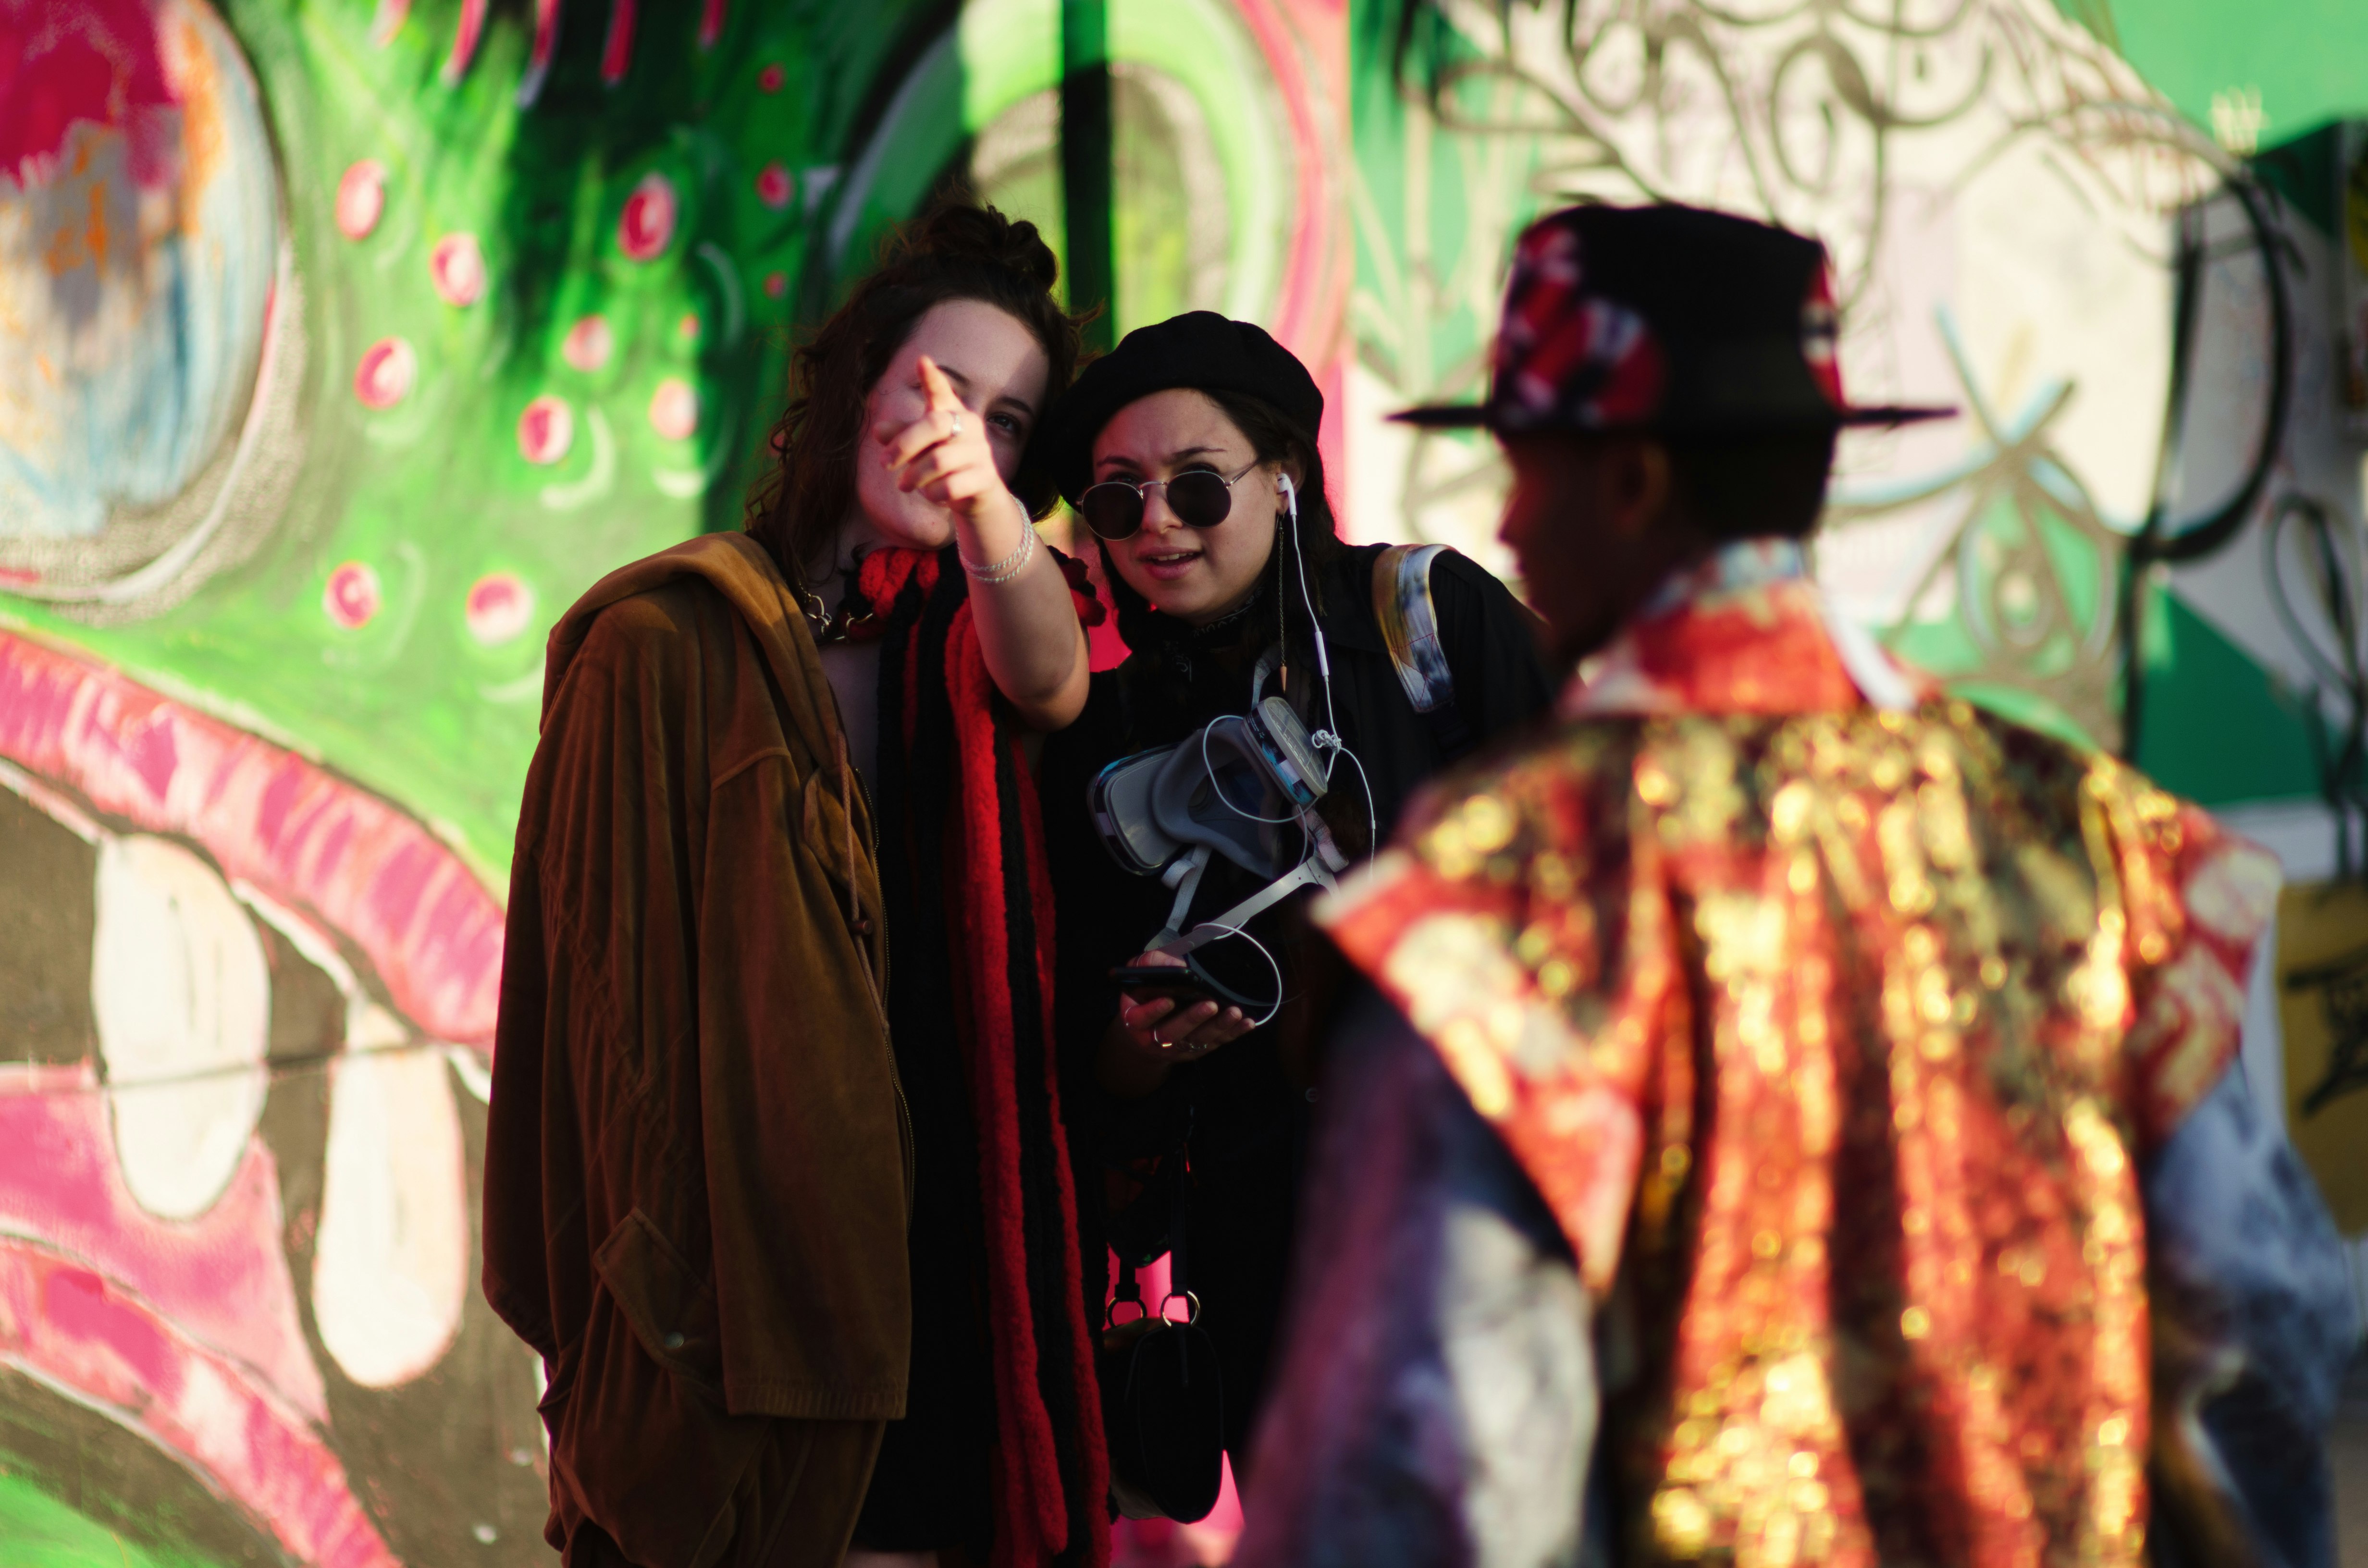 Two women are standing in front of a colourful mural at the Art Basel festival in Miami and discussing something out of the frame. A man in a bright costume is walking across the shot.